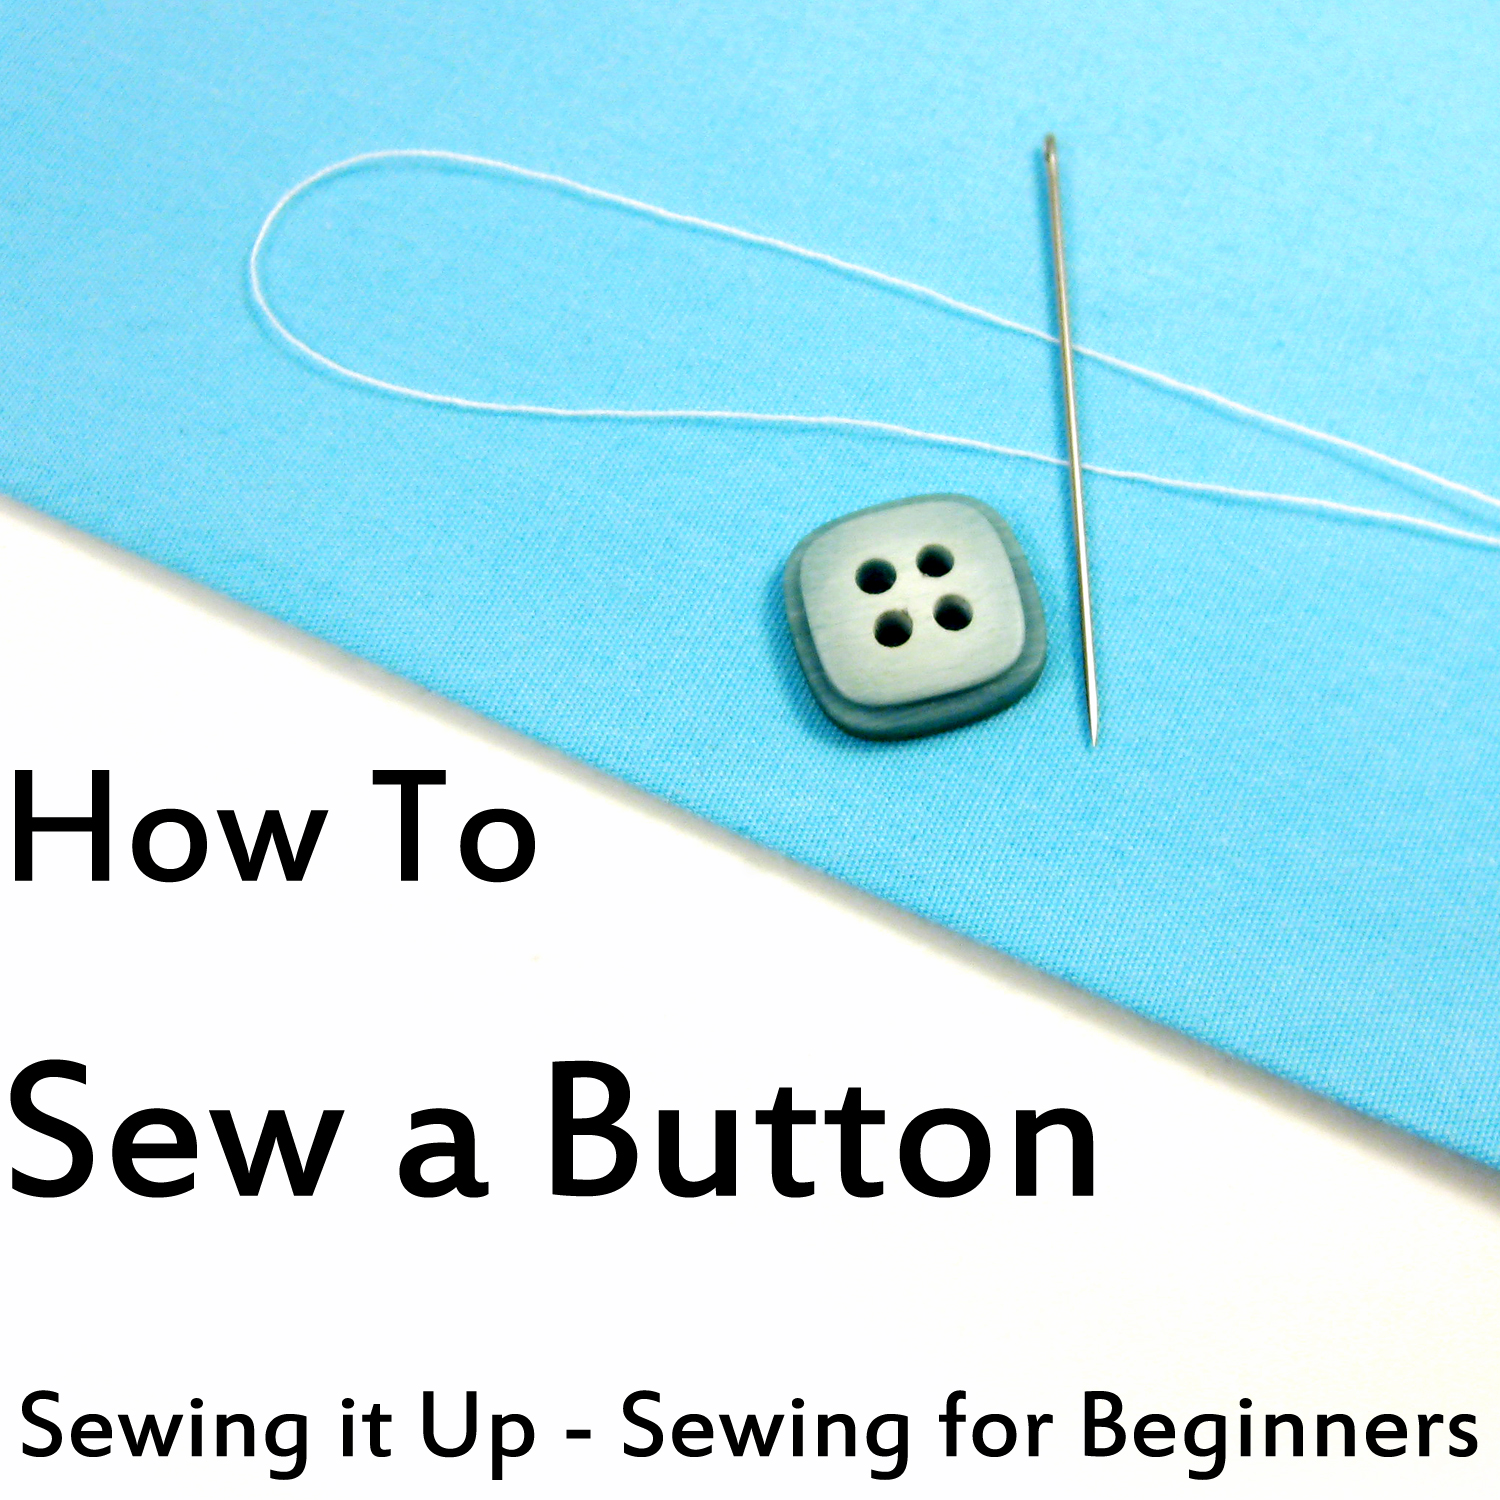 How To Sew A Button Sewing A Button Sewing Tutorial - Bank2home.com